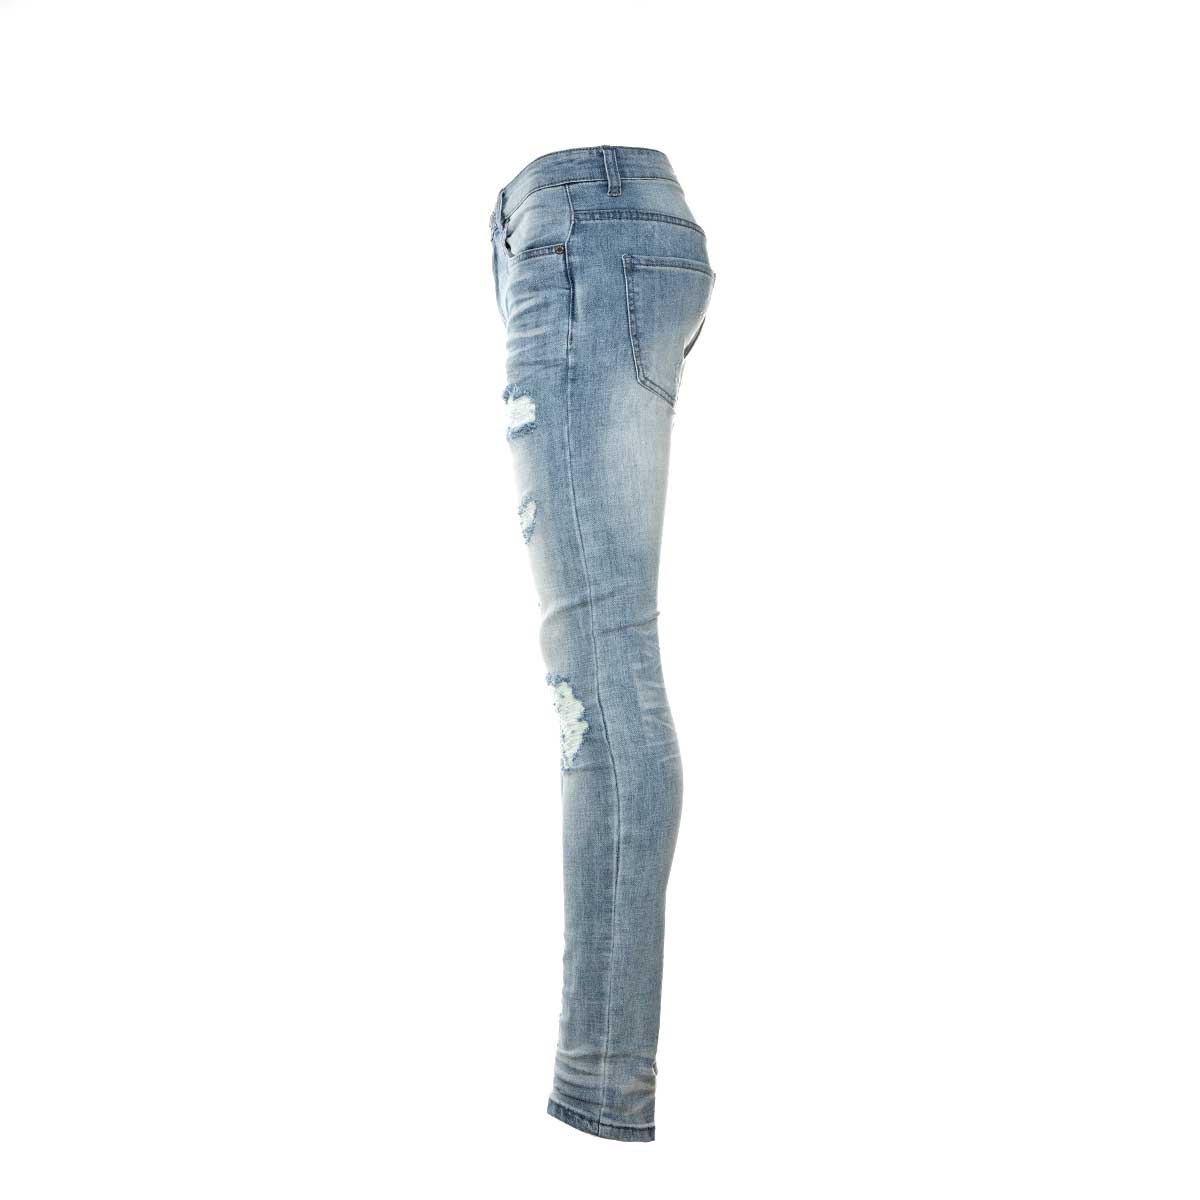 Serenede "Potala Place" Jeans